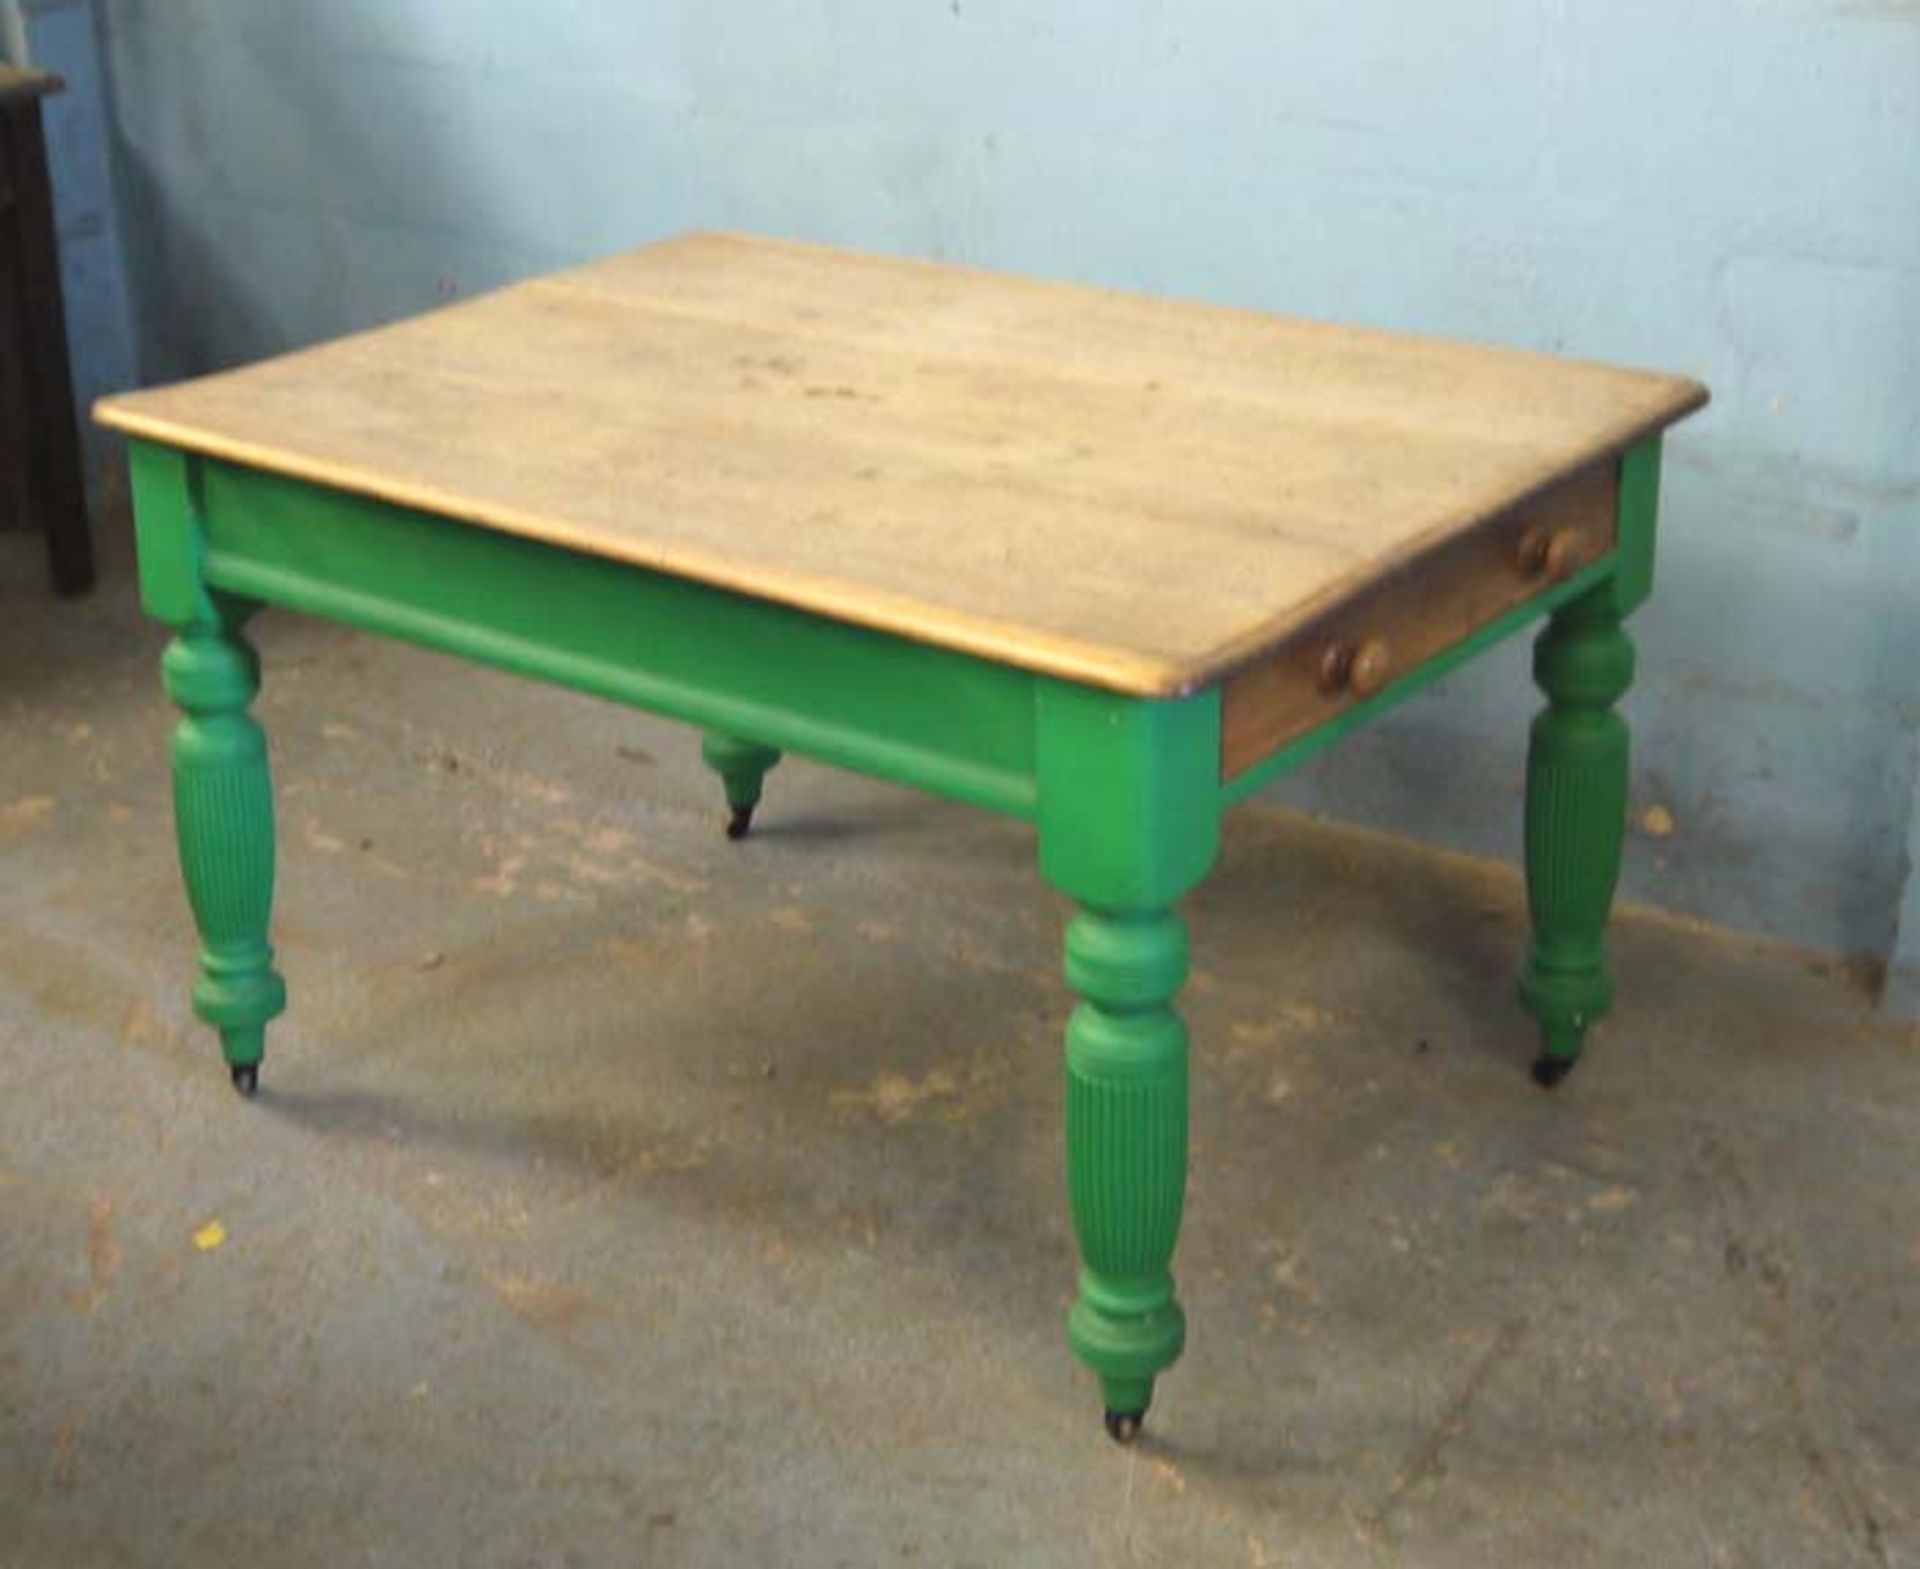 *VICTORIAN PINE KITCHEN TABLE, LEGS PAINTED GREEN. 705MM ( 27.75" ) HIGH X 1200MM ( 47.25" ) WIDE - Image 2 of 2